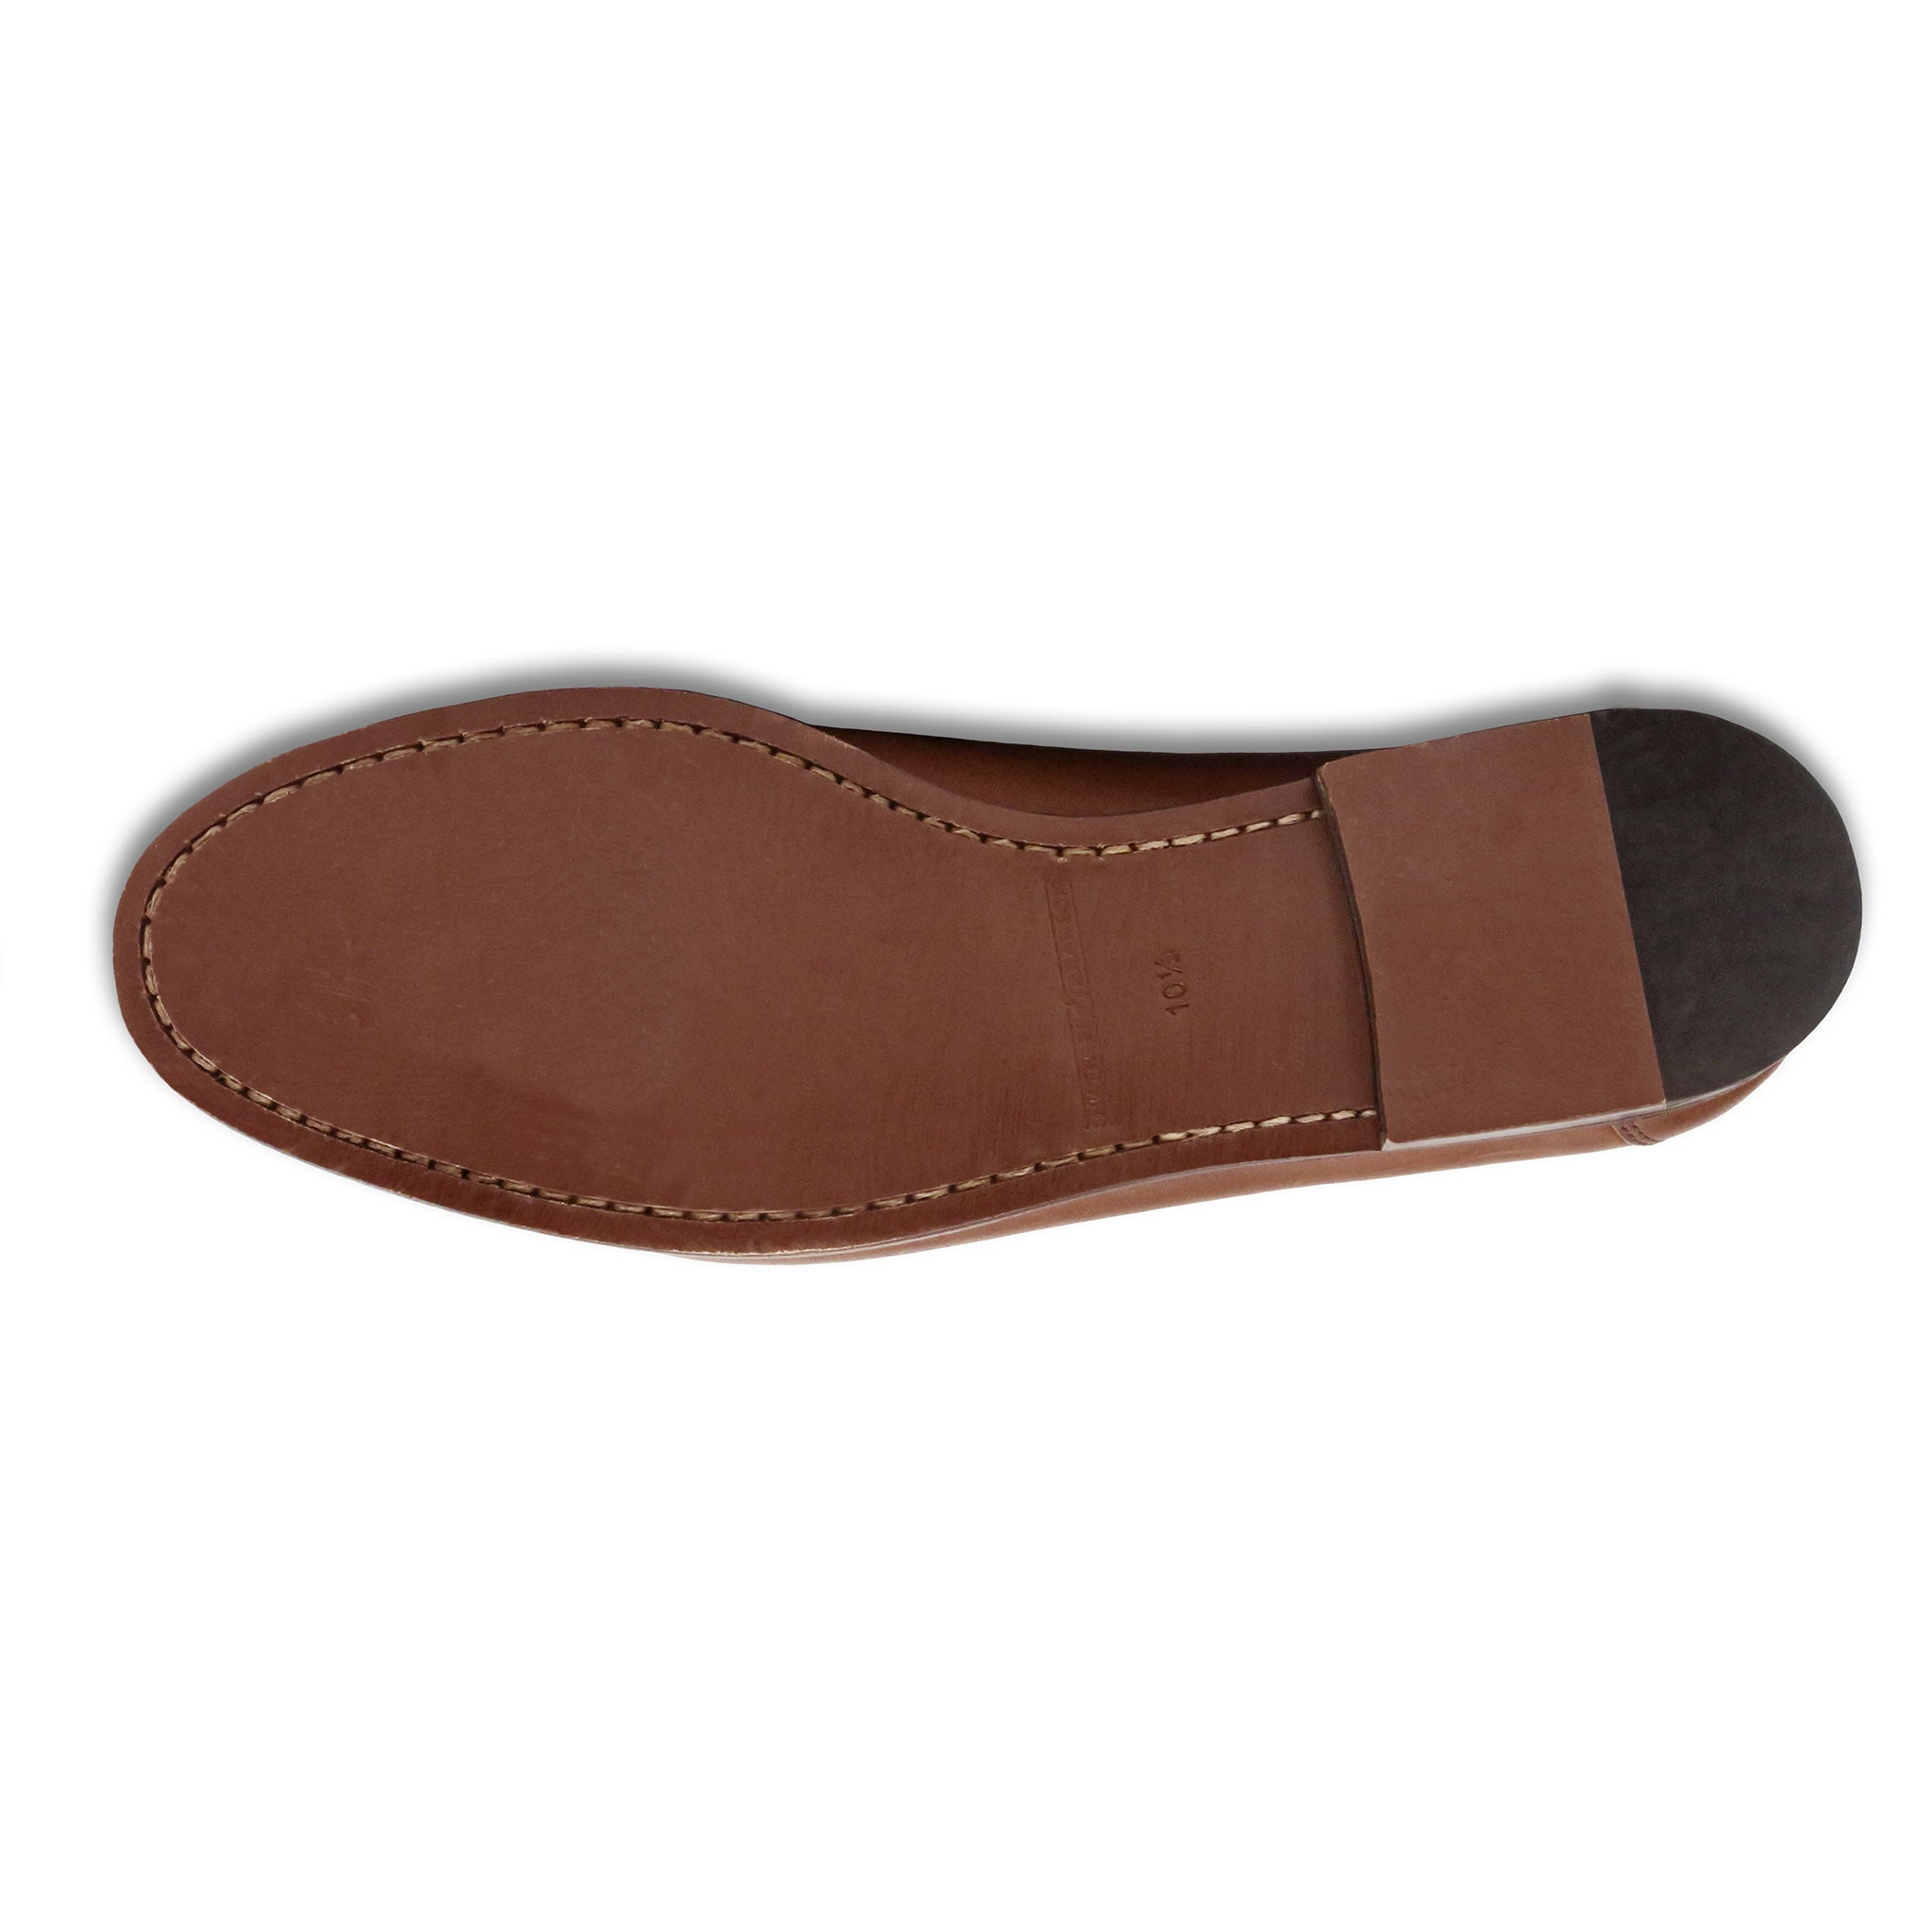 Dancing Bears Downing Bit Loafers (Dark Navy) (Chestnut Leather)